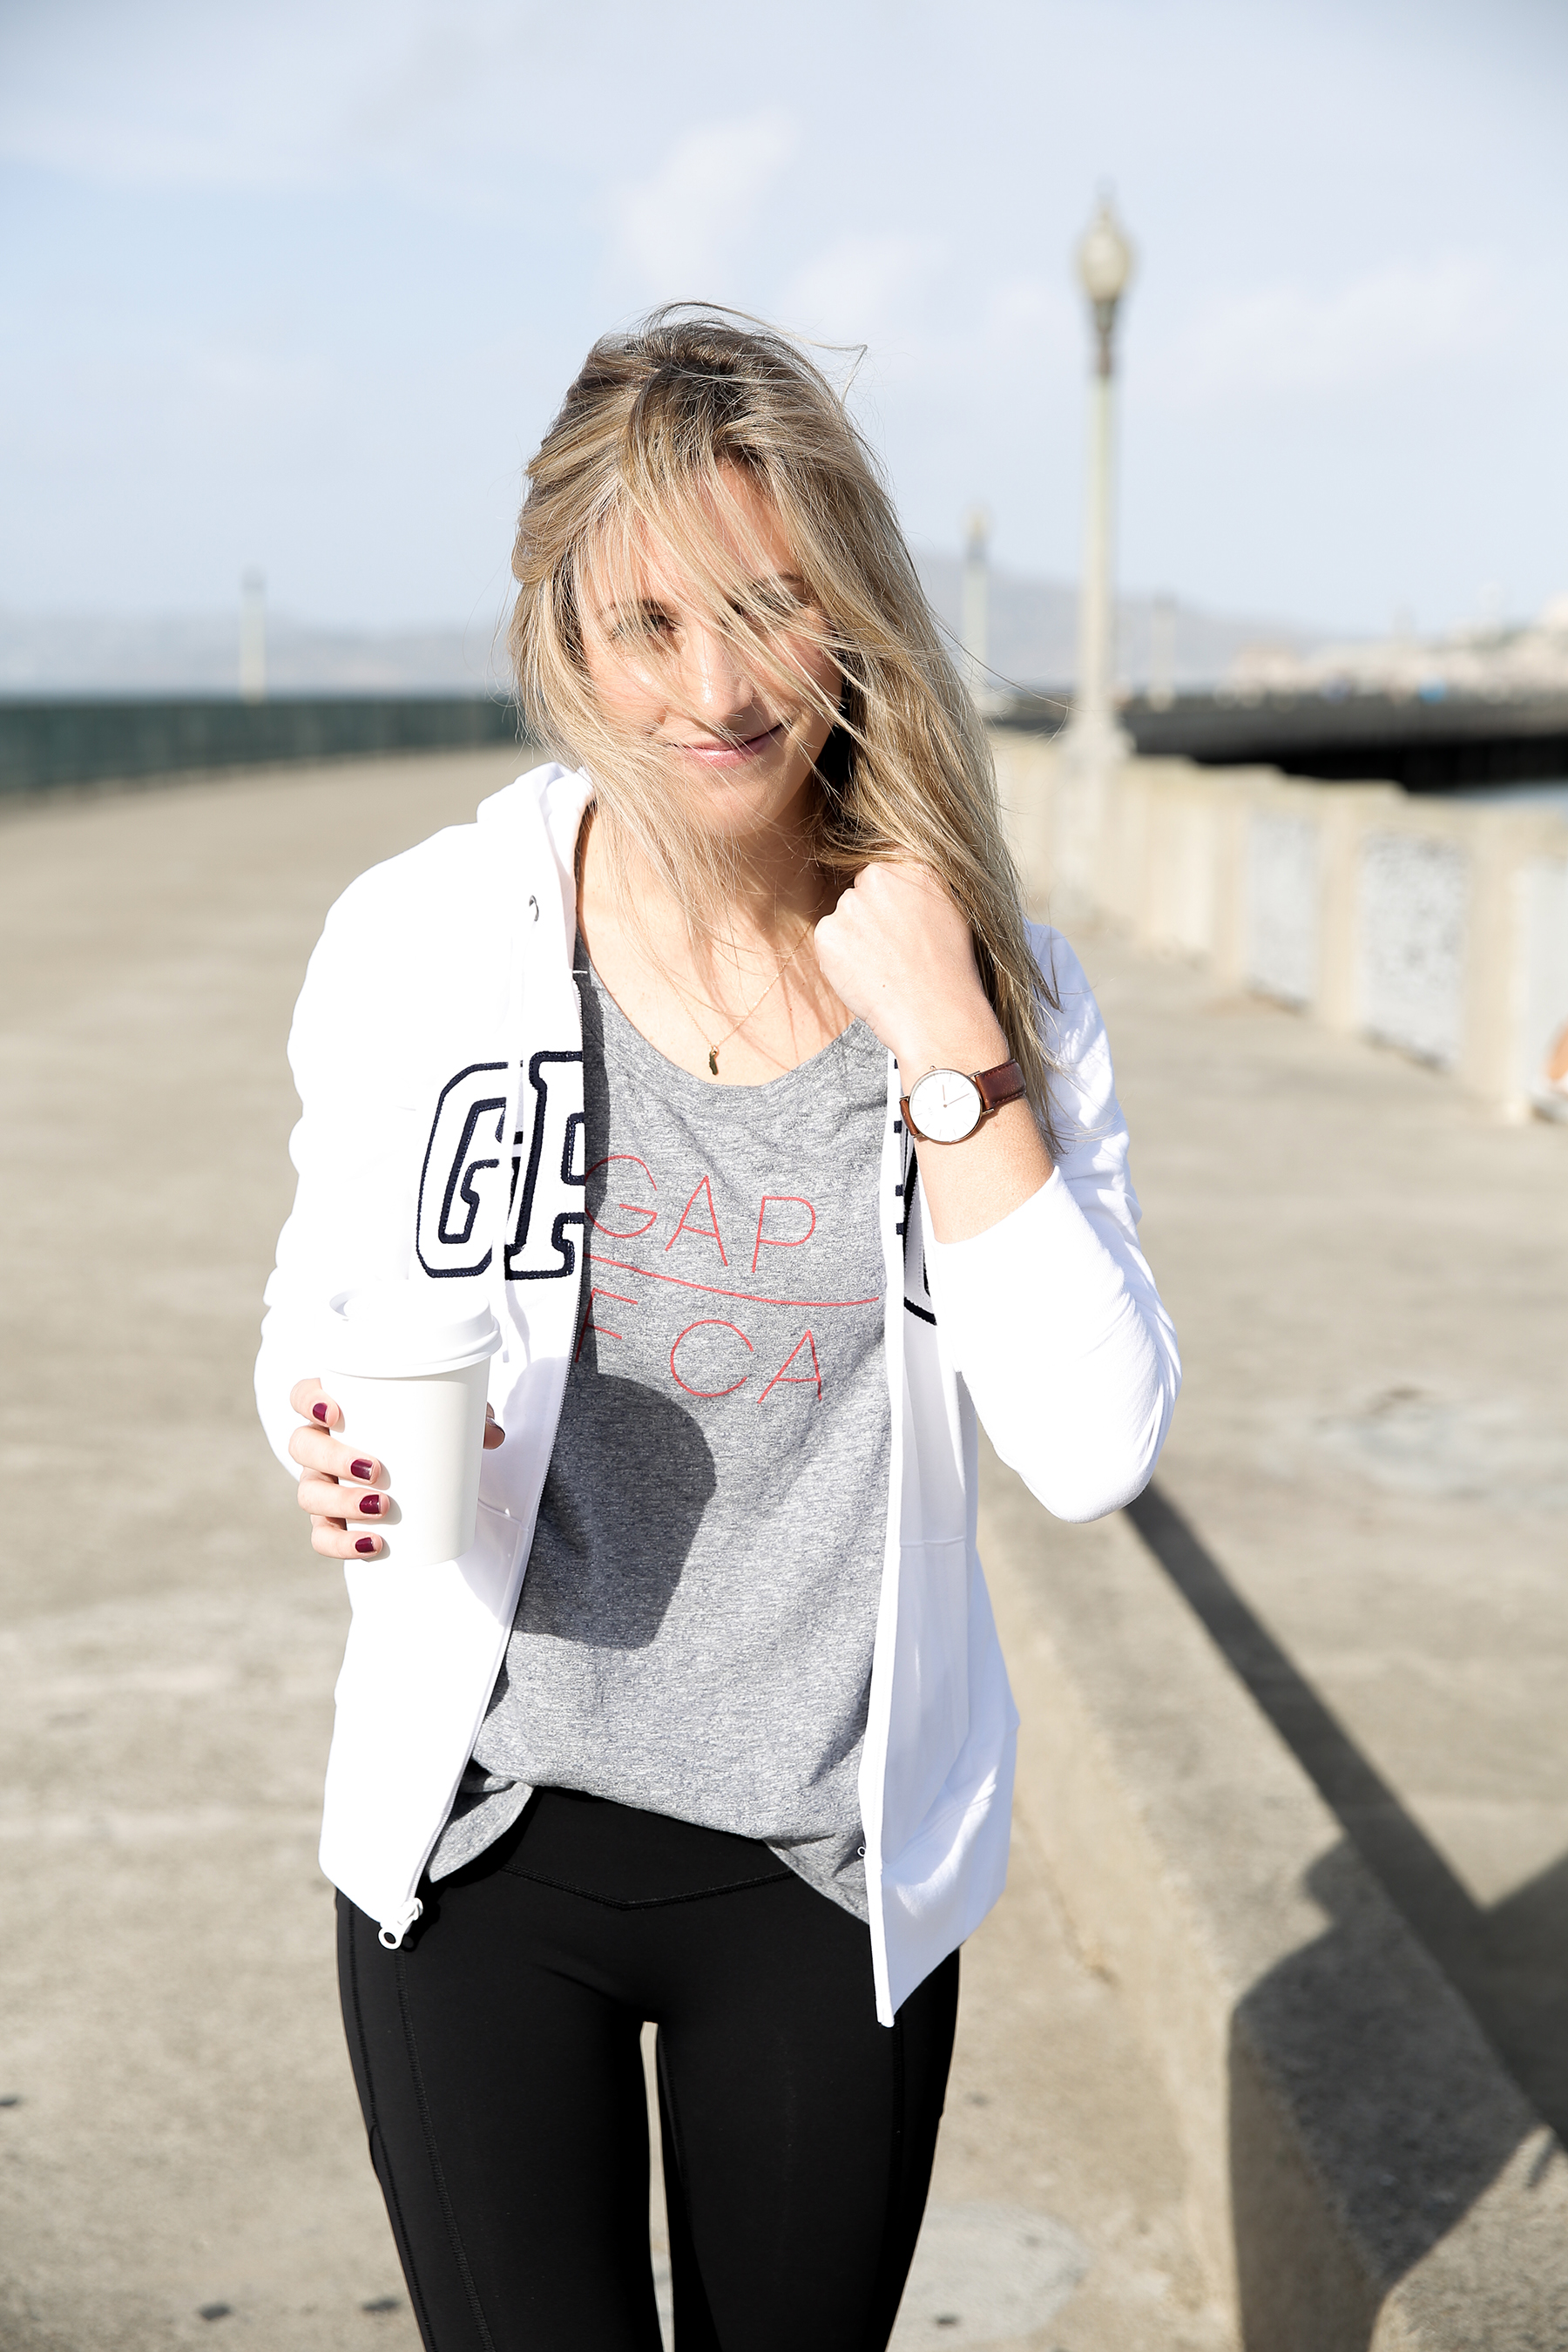 gap logo, gap factory, athleisure, stylish workout wear, stylish leisure wear, stylish lounge wear, cozy casual outfit, gray t-shirt, white zip-up, black leggings outfit, photography by Andrea Posadas of Amanda Holstein for Advicefroma20Something.com